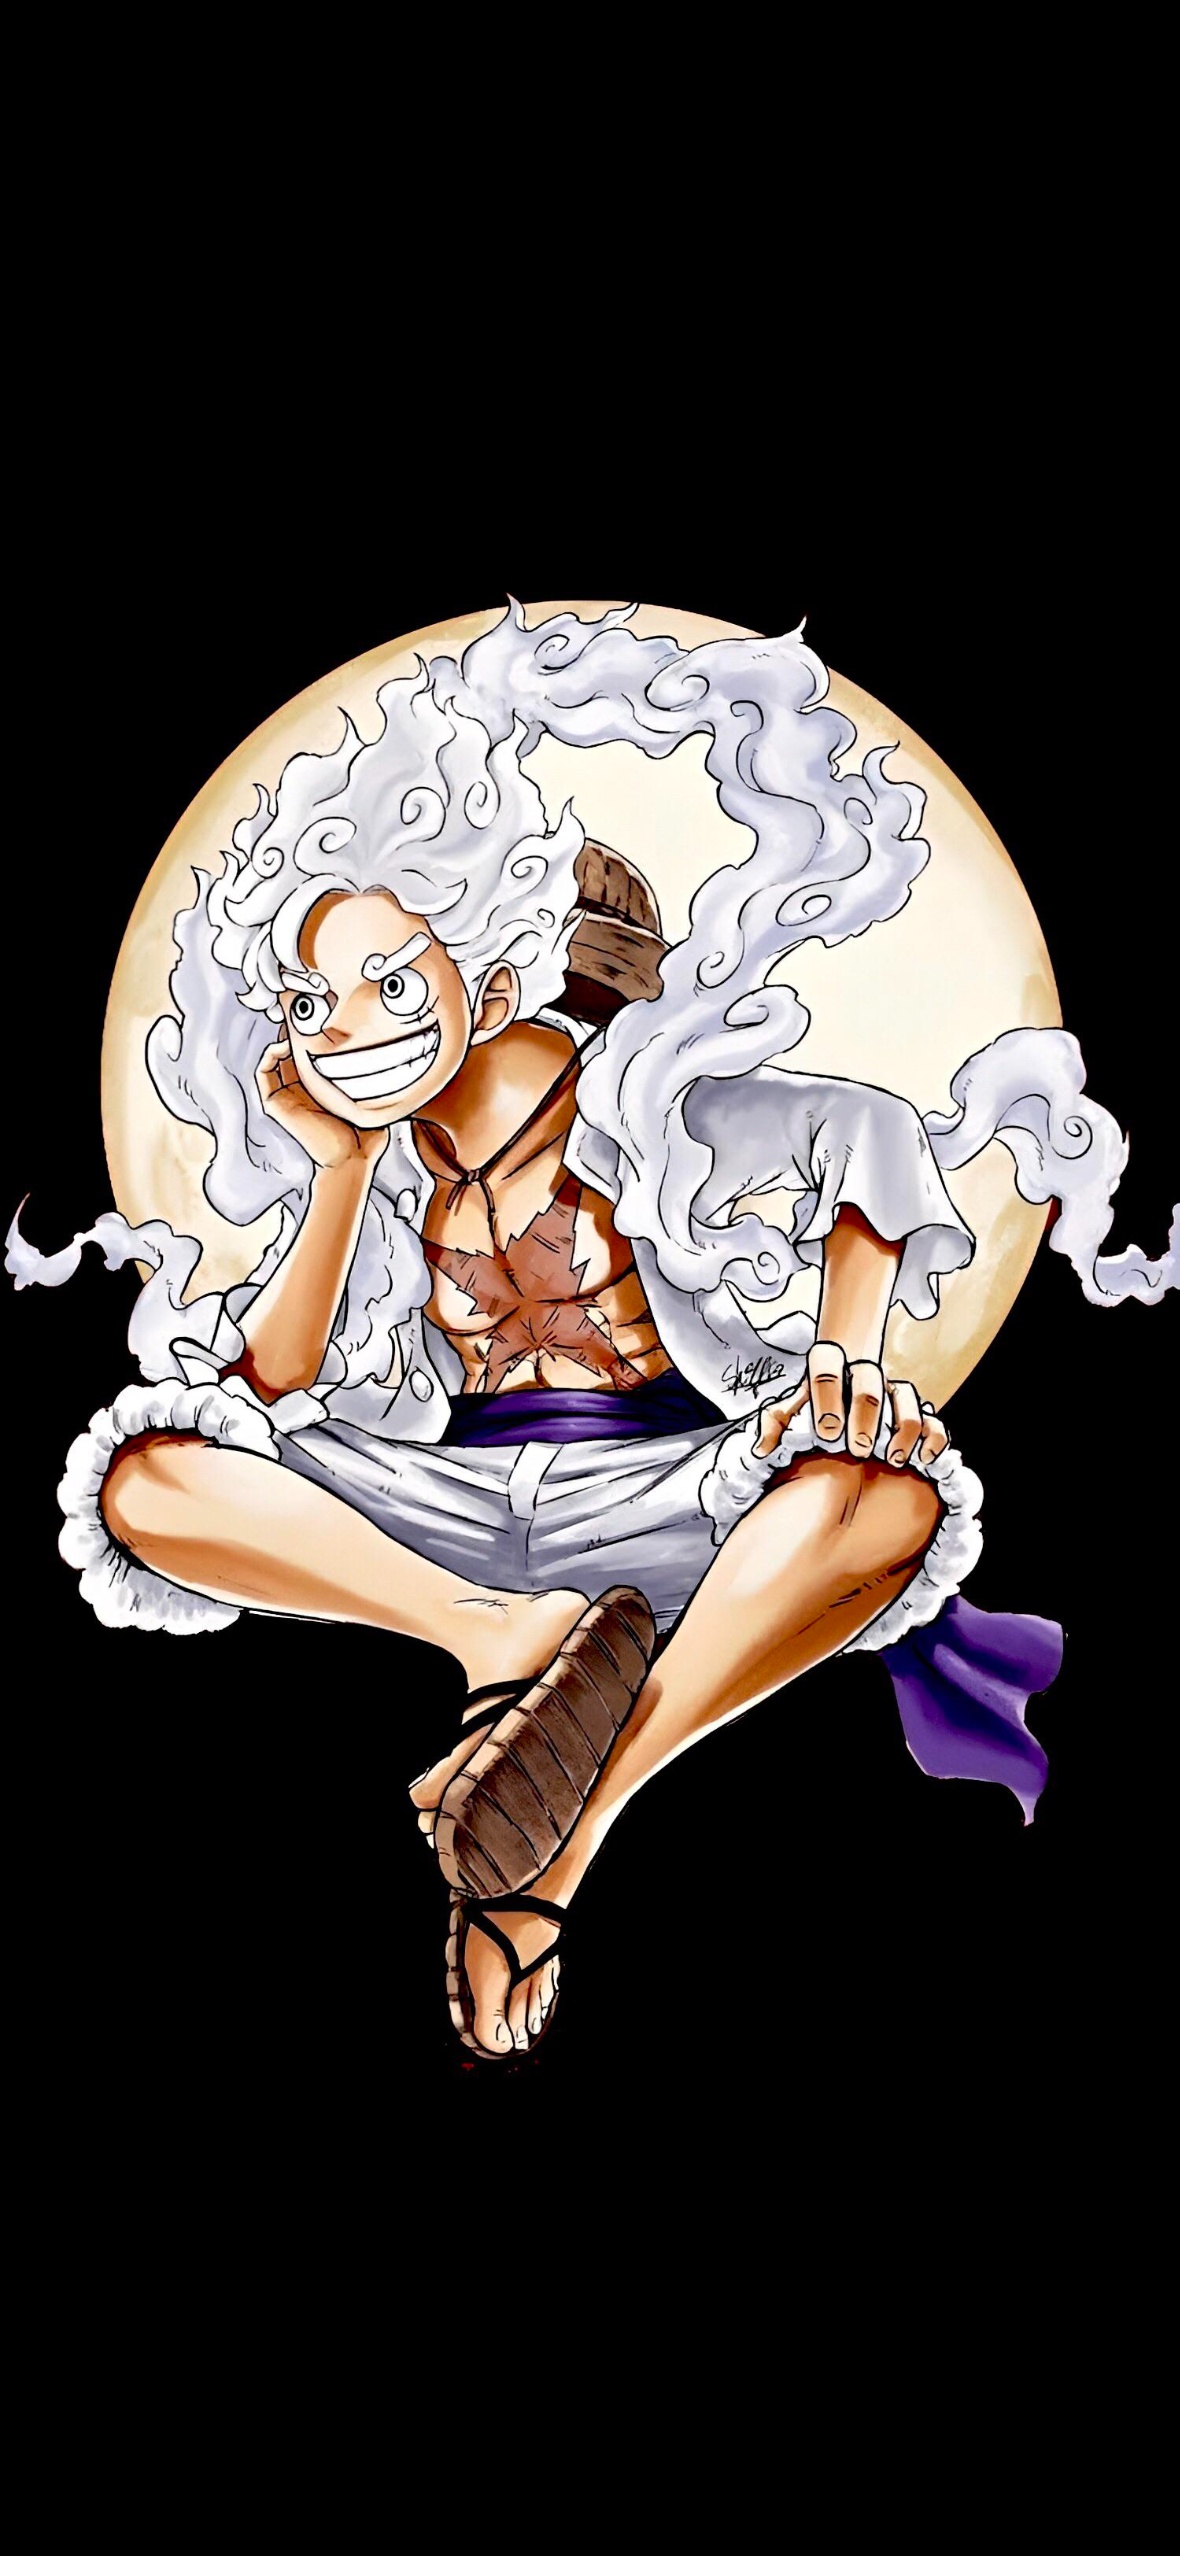 Luffy Gear 5 Wallpaper in 2023  One piece wallpaper iphone, Manga anime  one piece, Anime